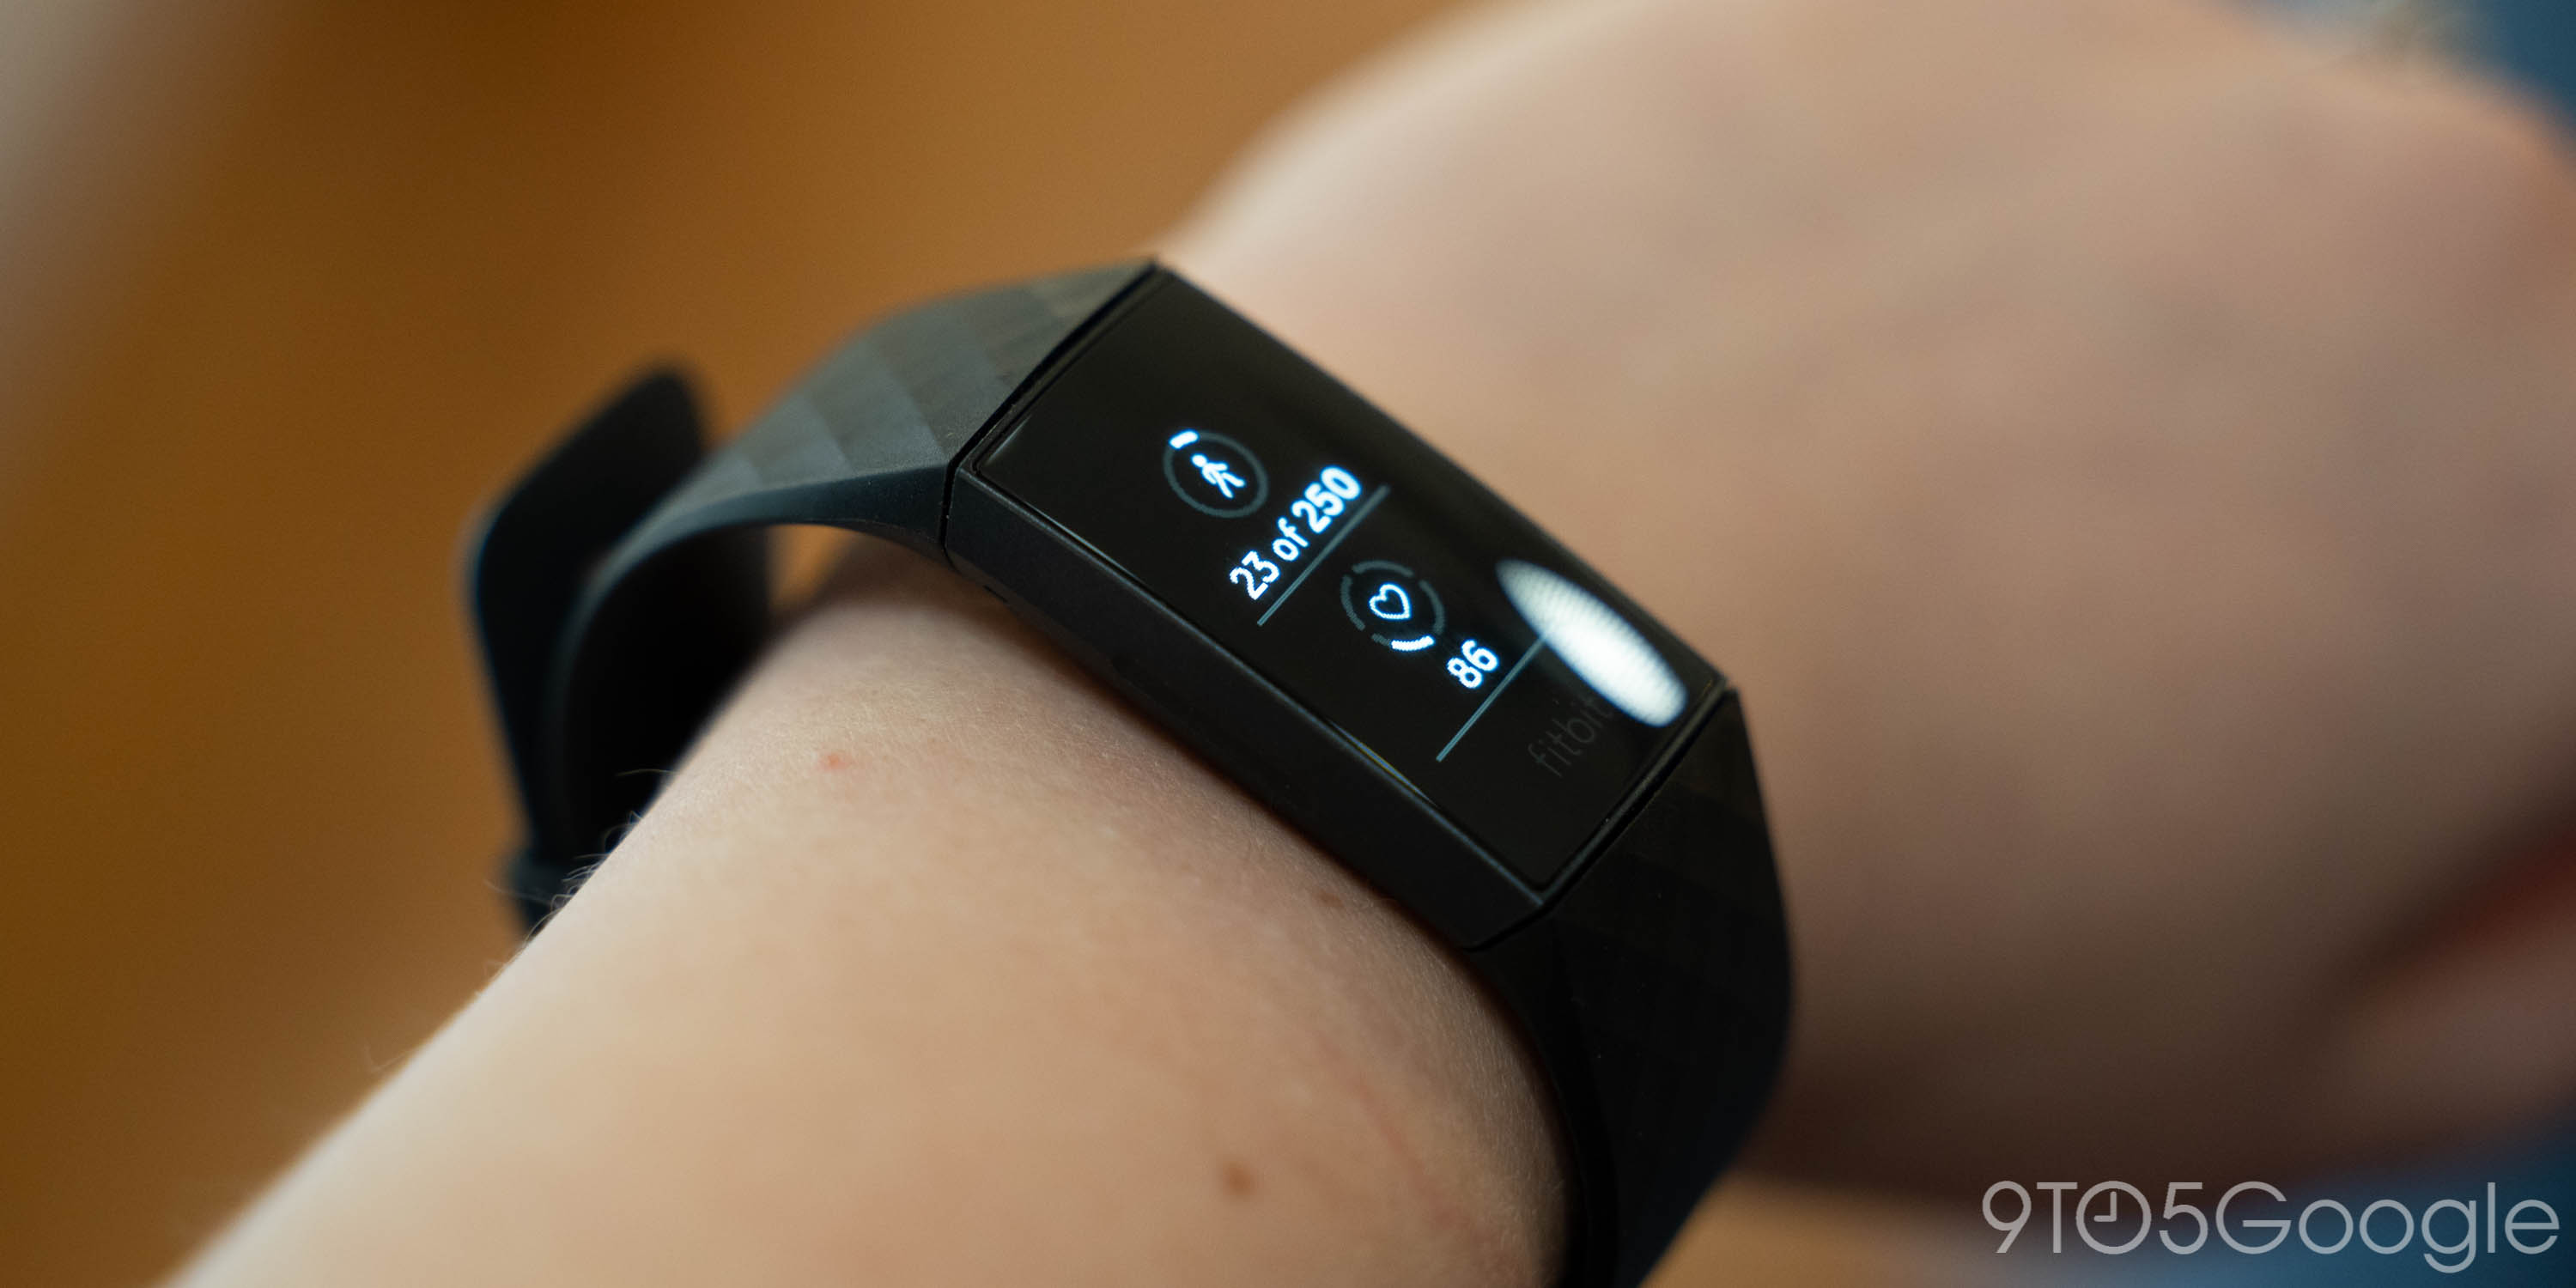 Fitbit Charge 4 review, one month later: All the fitness tracking